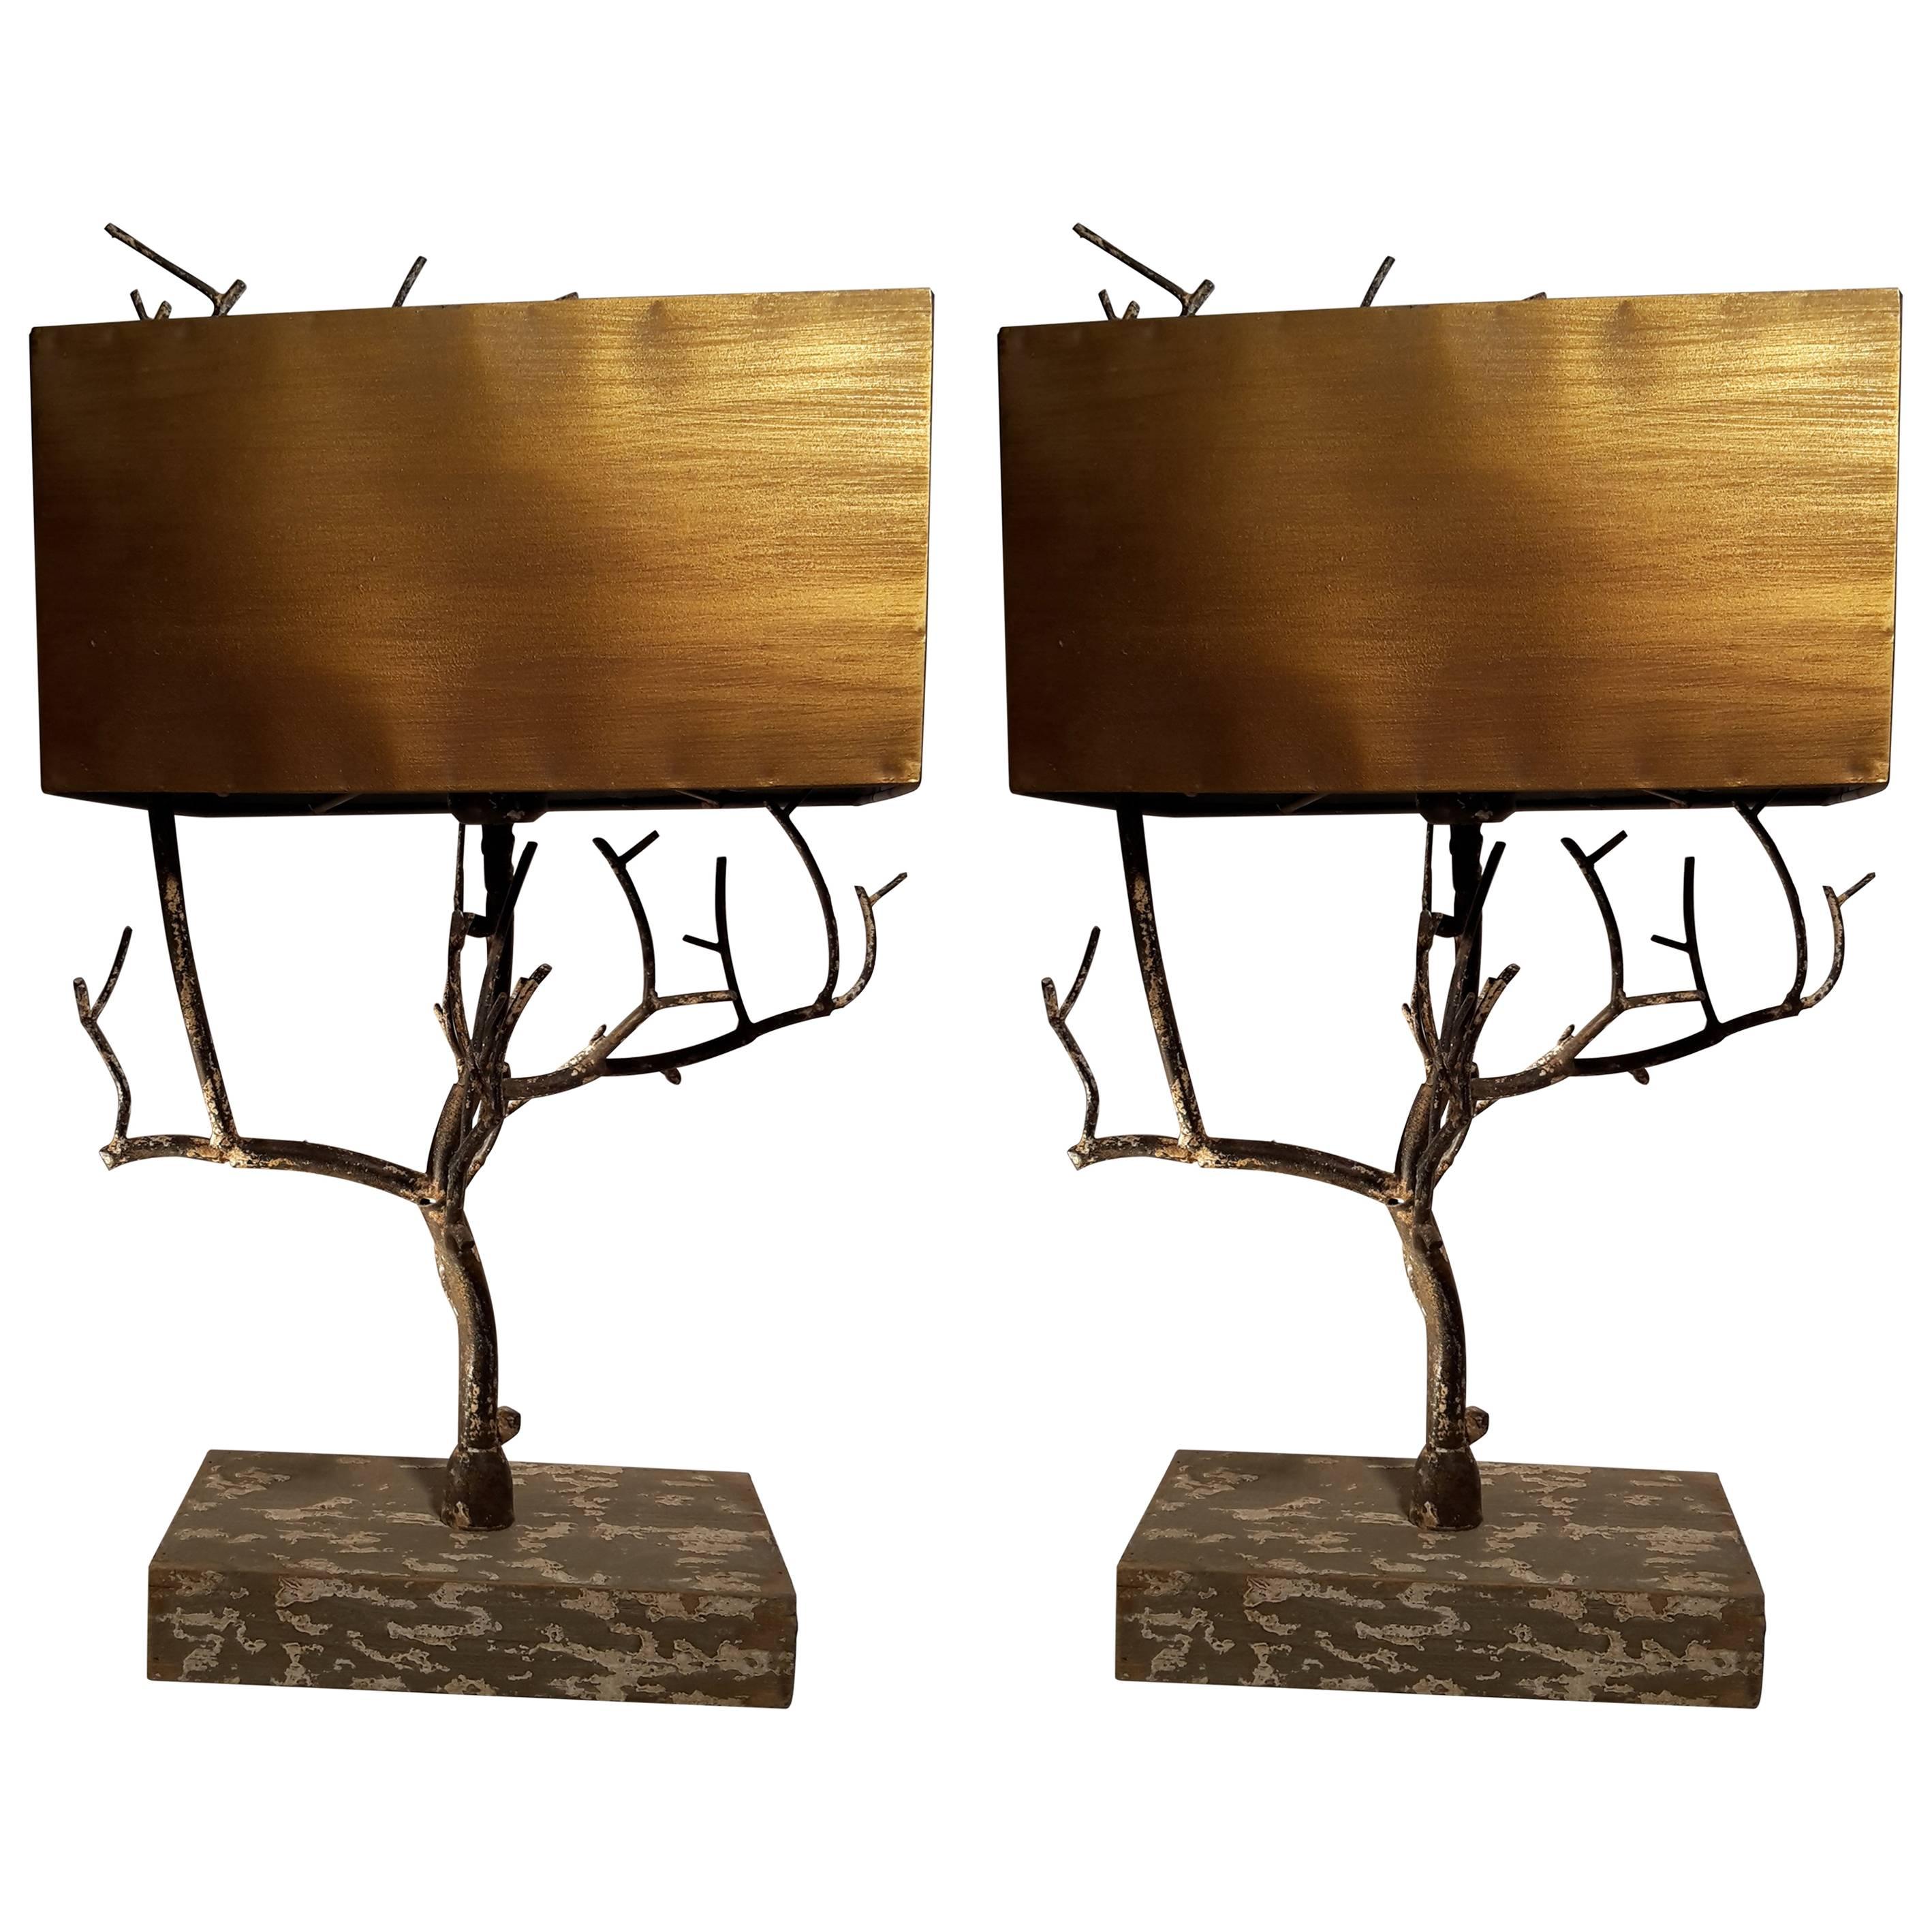 Pair of Table Lamps "Tree" For Sale